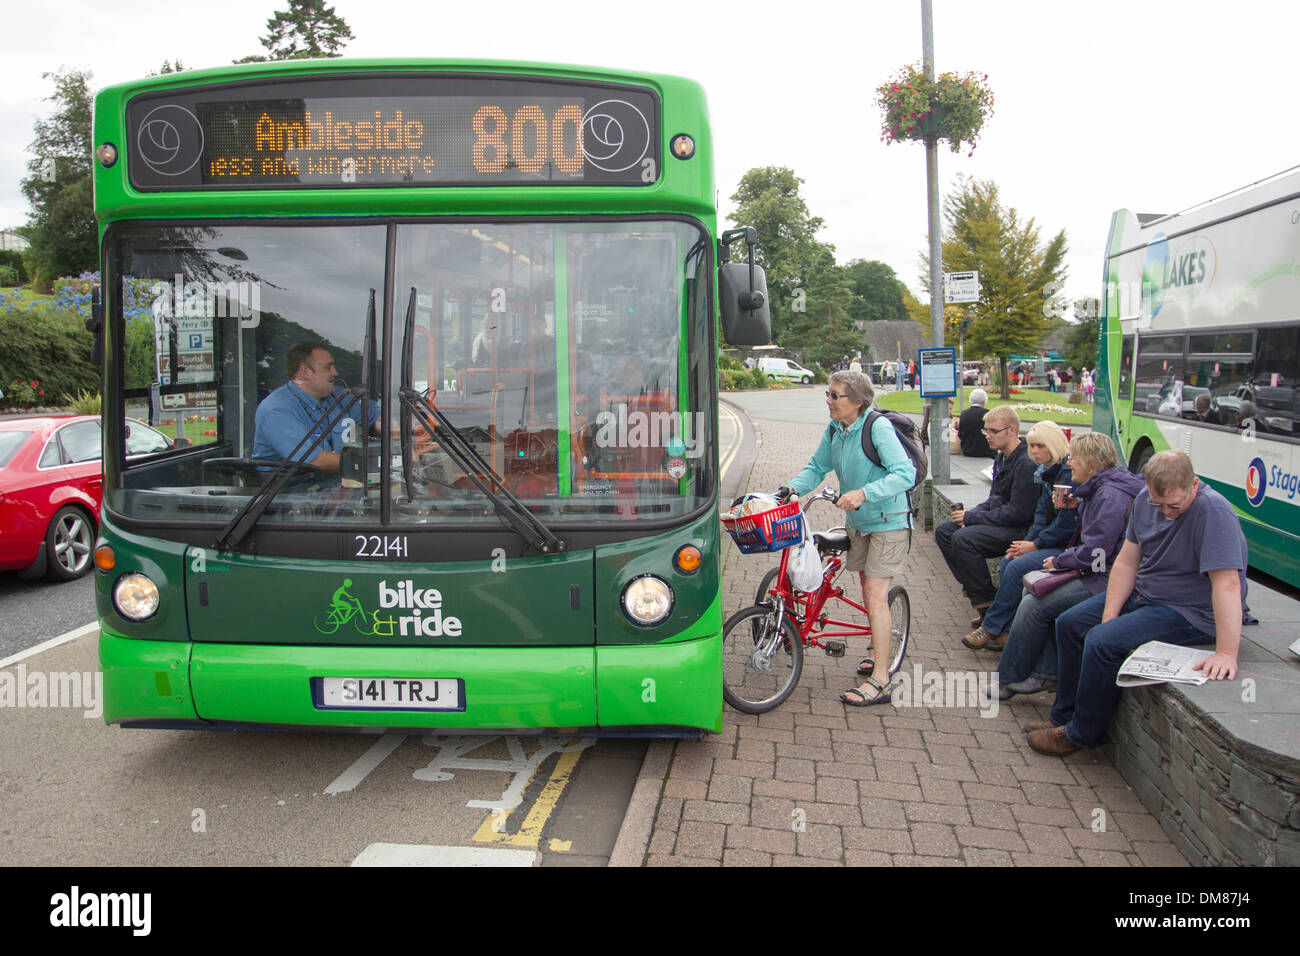 Bike Friendly Bus -bike and ride bus The Lake District Bus specially  adapted to take mountain bikes and even trikes Stock Photo